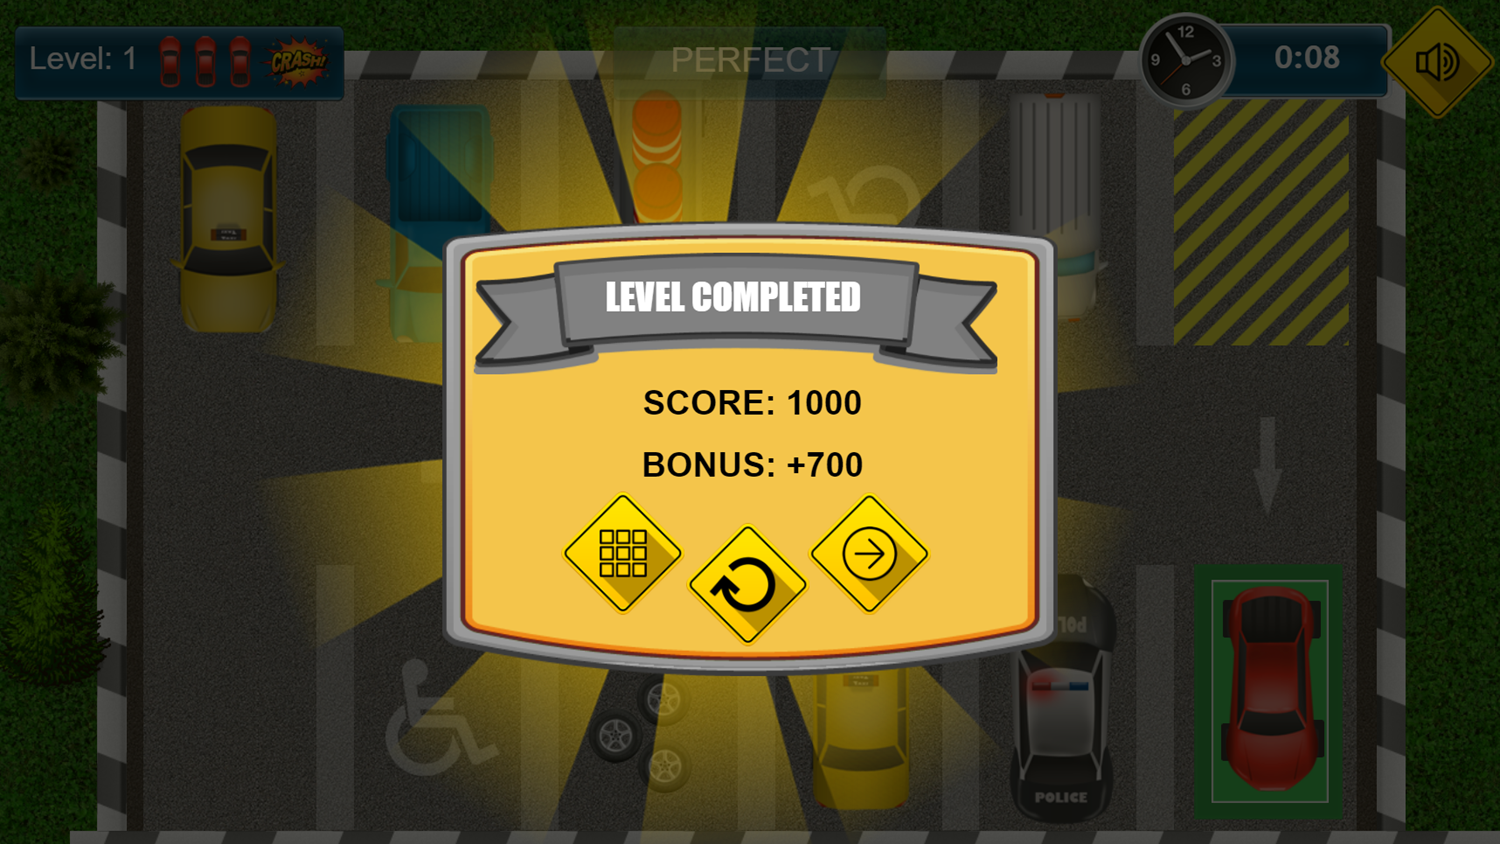 Parking Game Level Completed Screenshot.